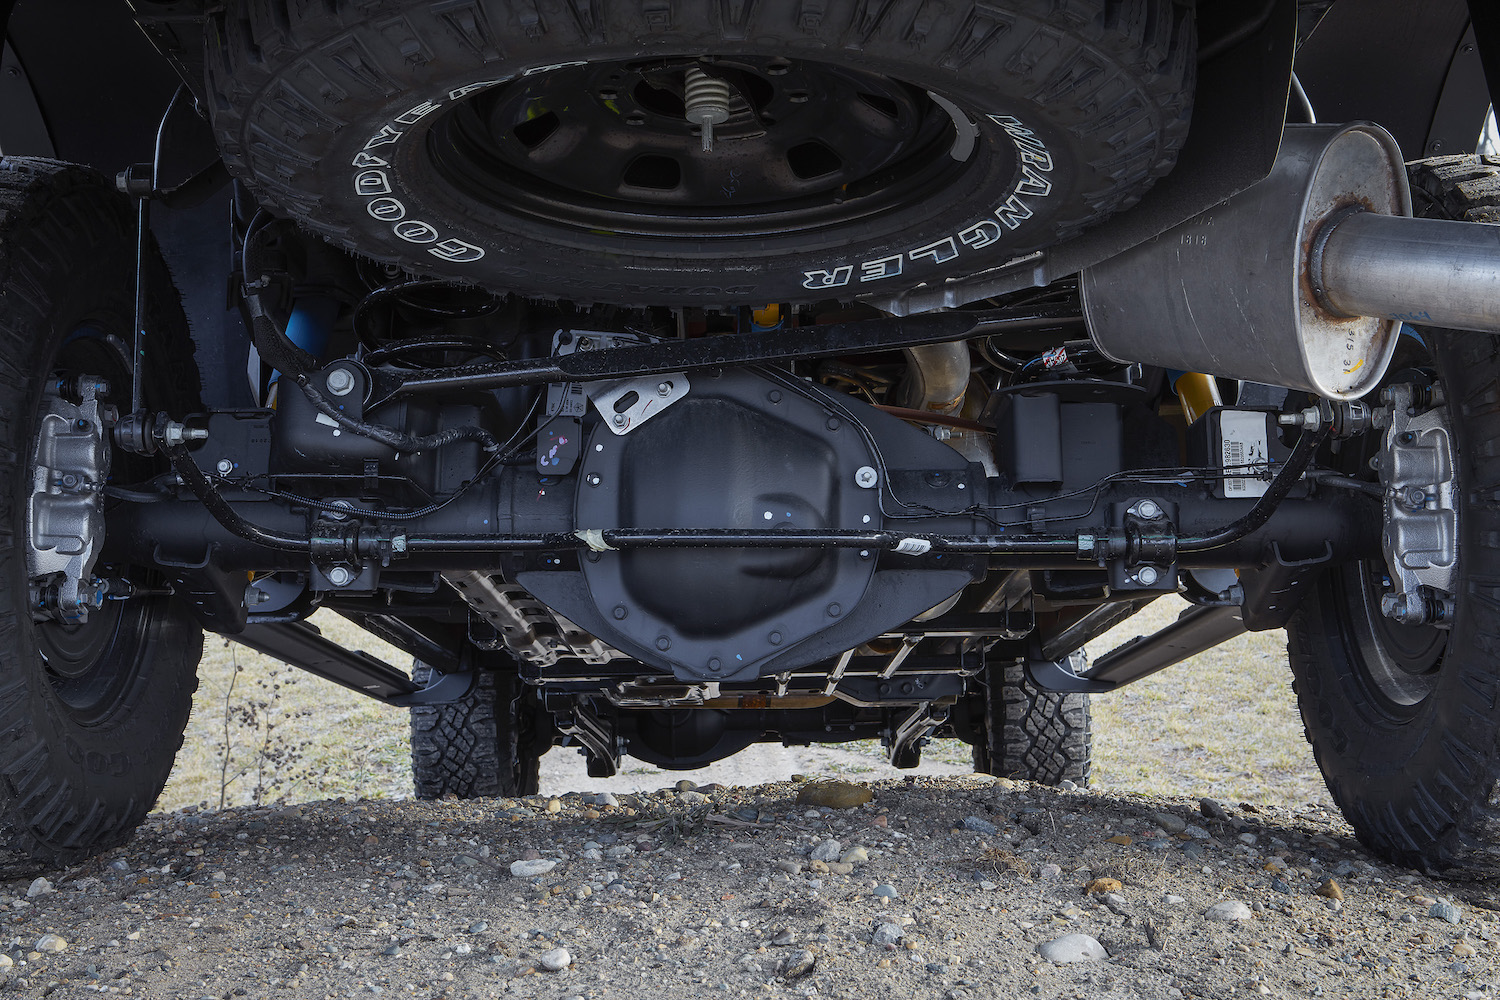 The drivetrain of a 4WD Ram 2500 Power Wagon pickup truck parked on a gravel road, its spare tire visible.